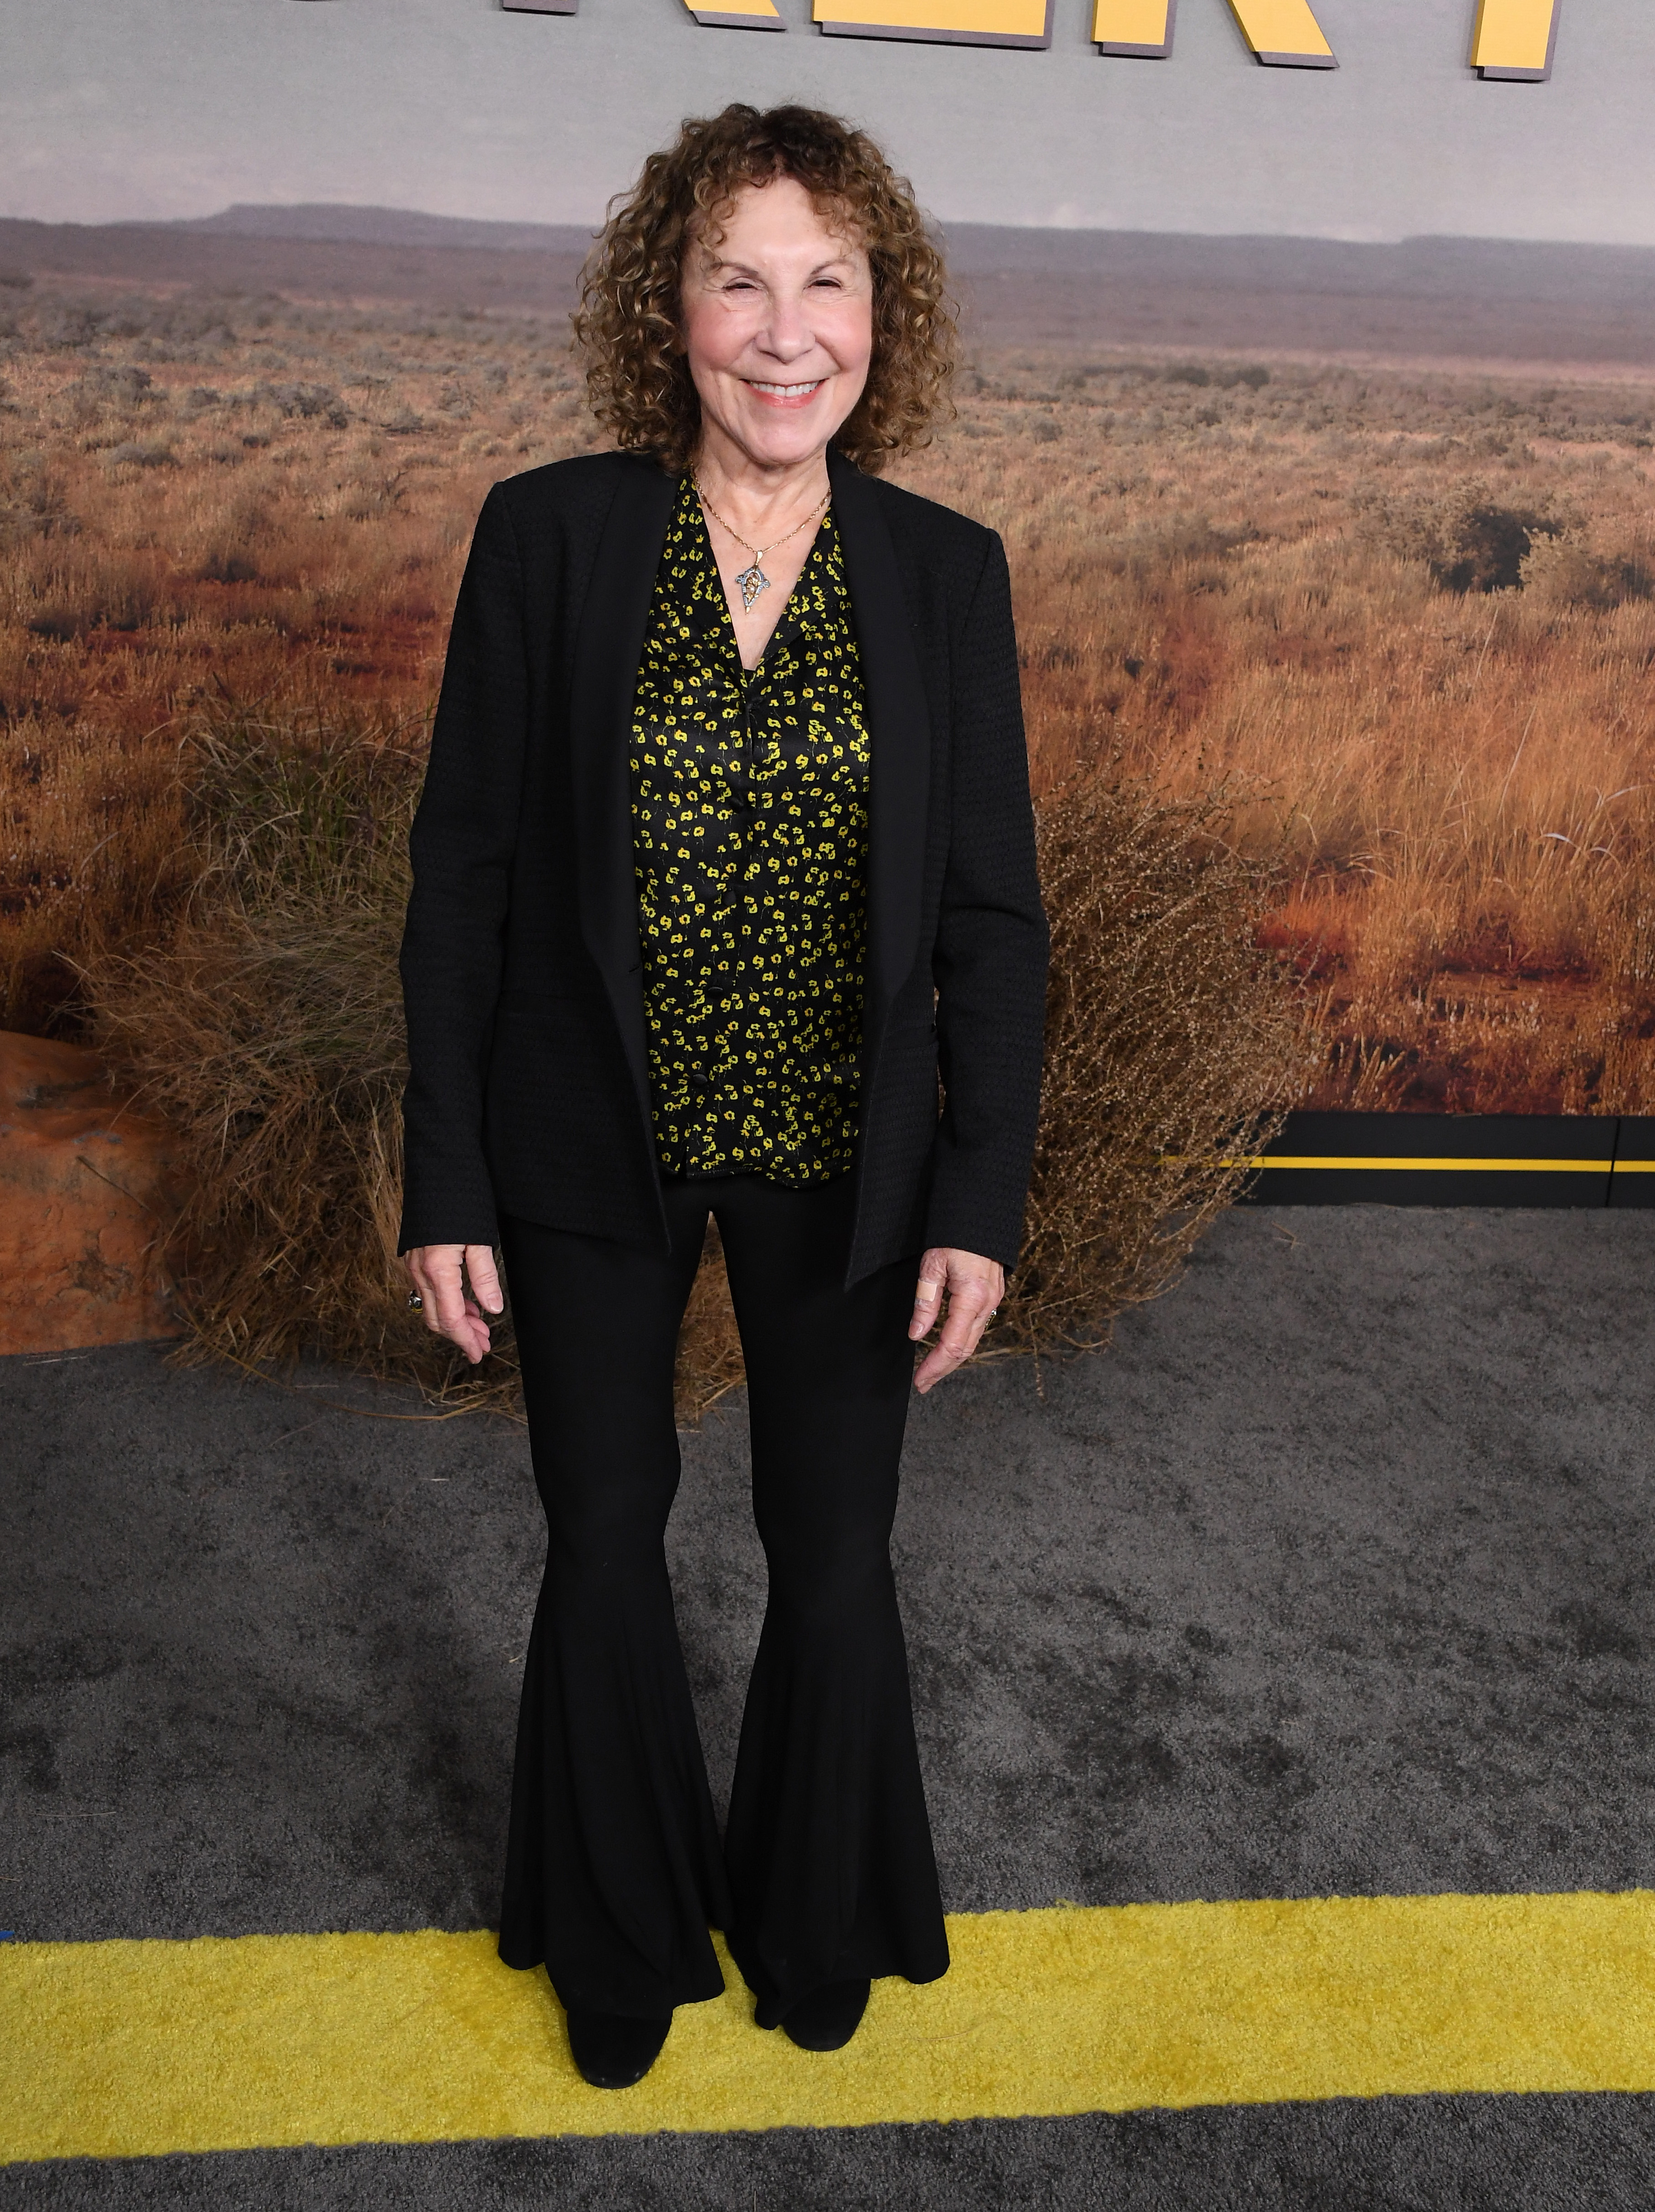 Rhea Perlman at the Los Angeles Premiere For Peacock Original Series "Poker Face" in Los Angeles, California on January 17, 2023 | Source: Getty Images